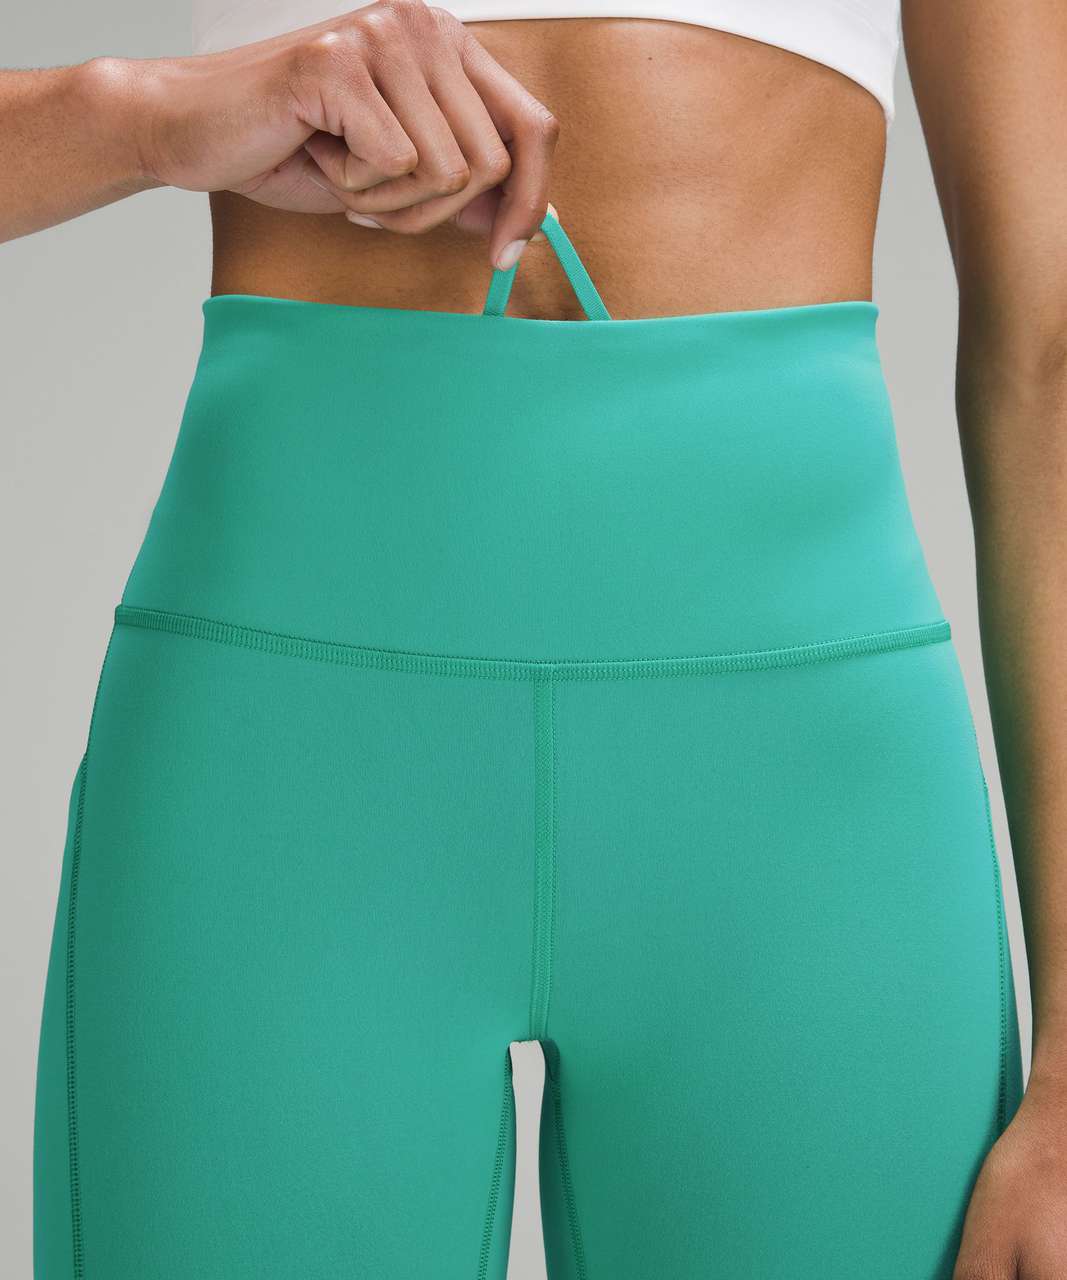 Lululemon Wunder Train High-Rise Crop with Pockets 23" - Kelly Green